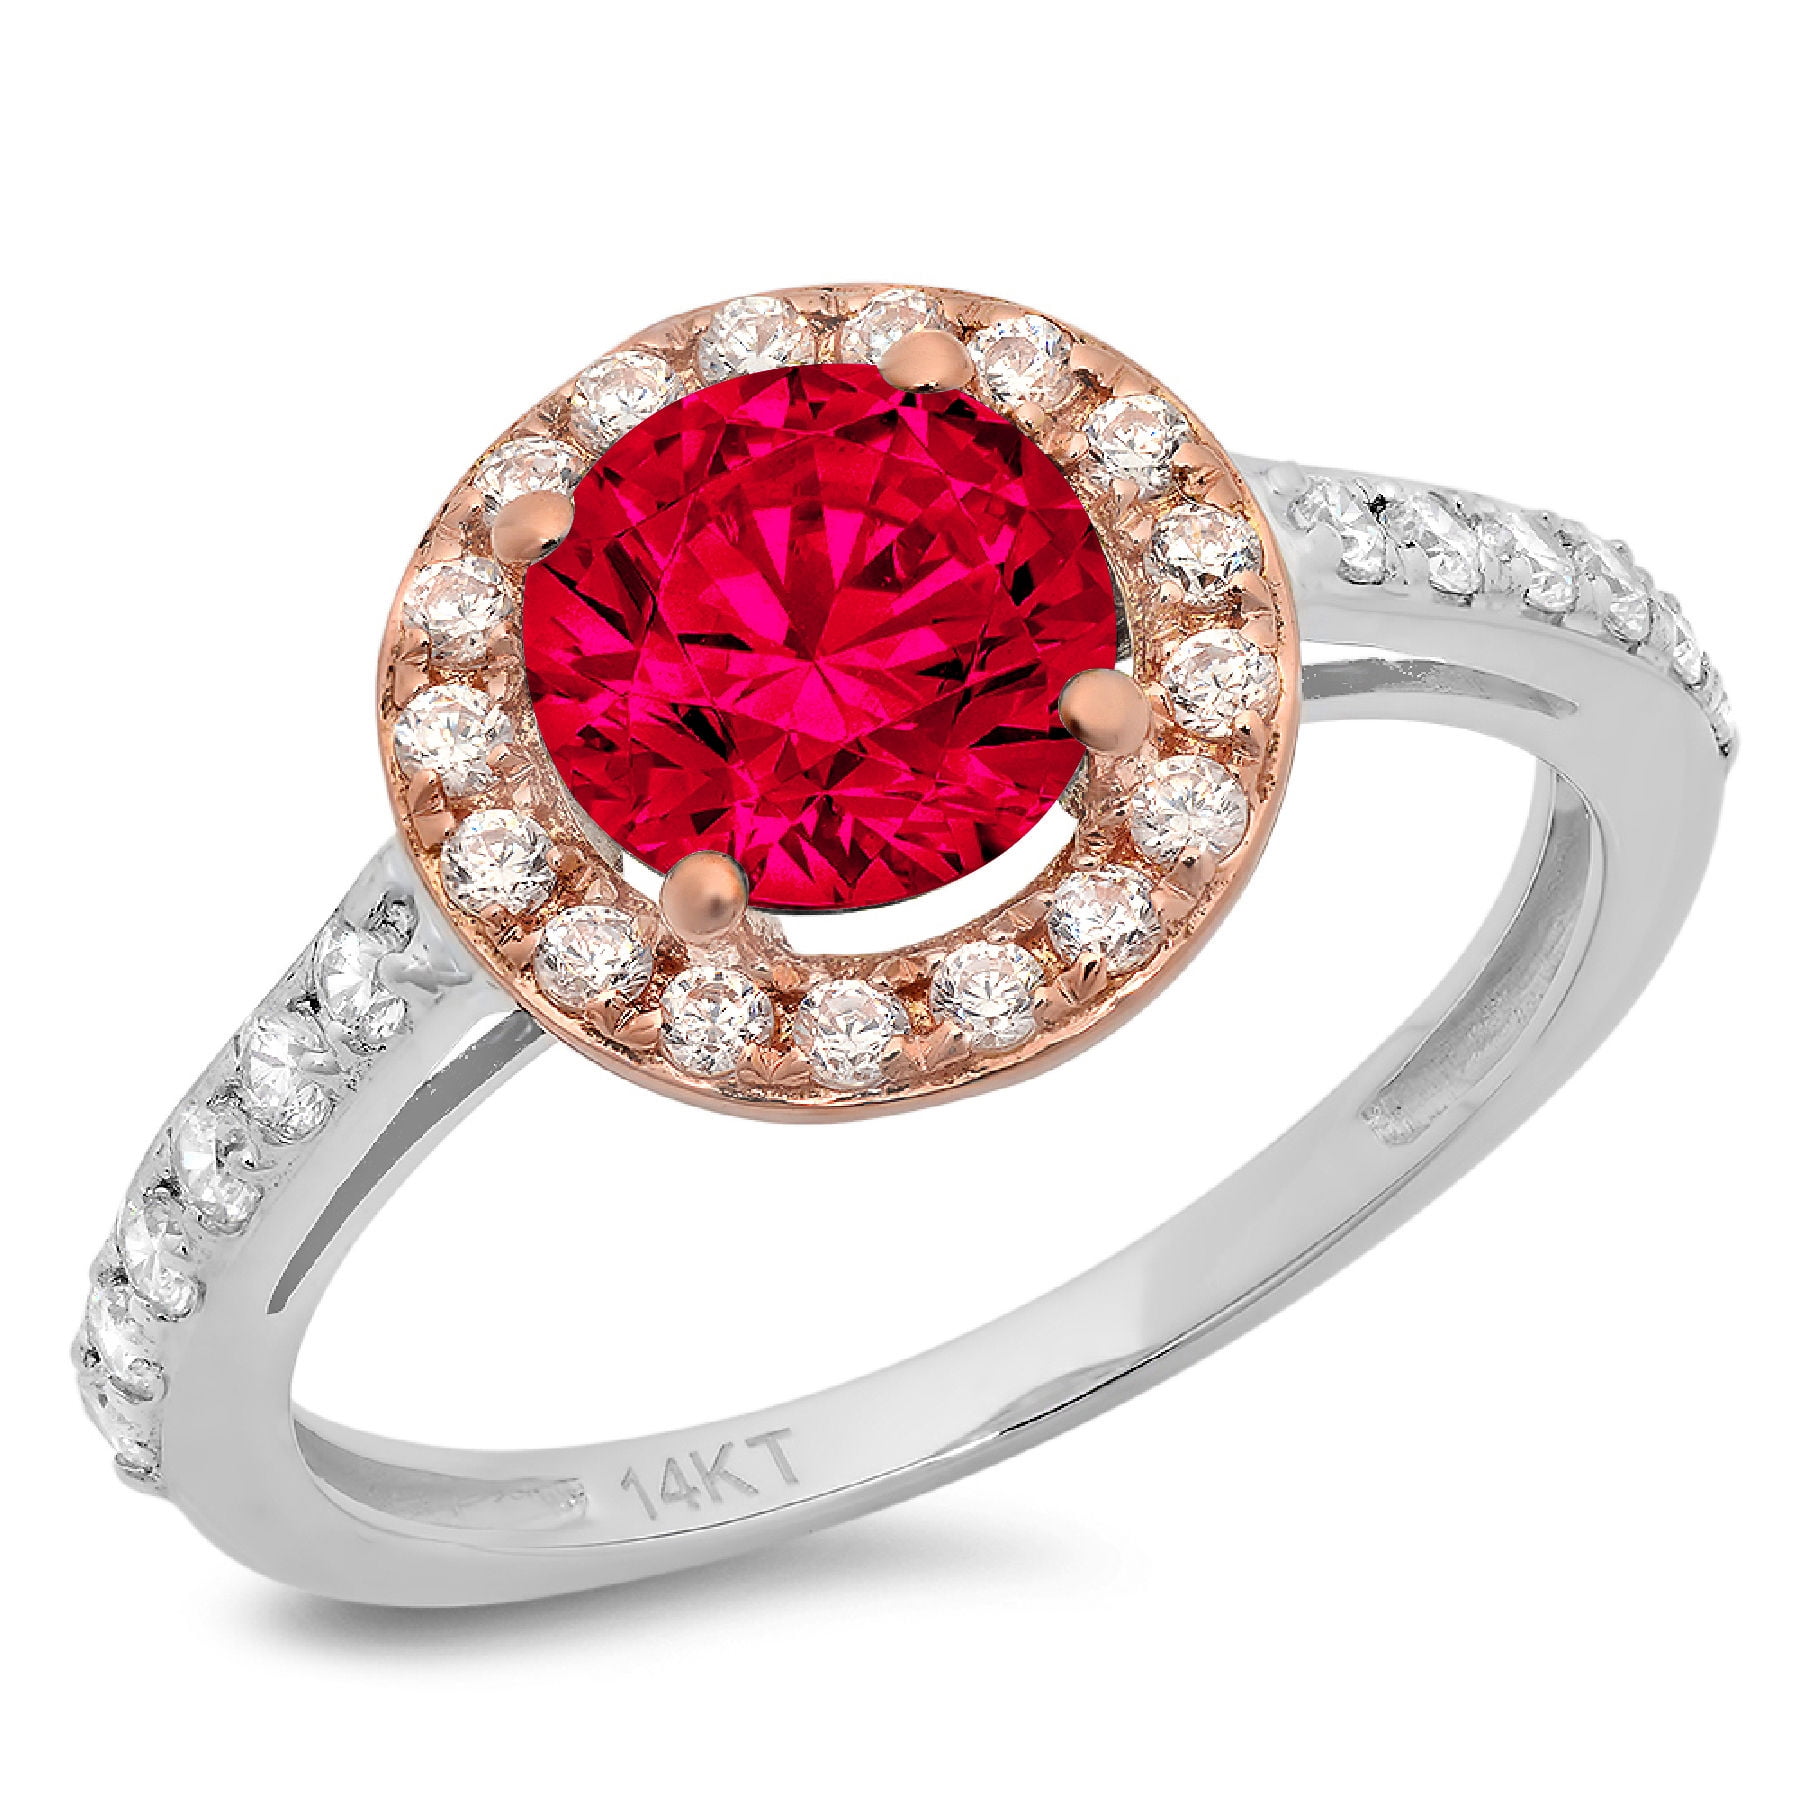 Details about   2 Ct Round Cut Red Ruby Diamond Cluster Engagement Ring 14k Yellow Gold Finish